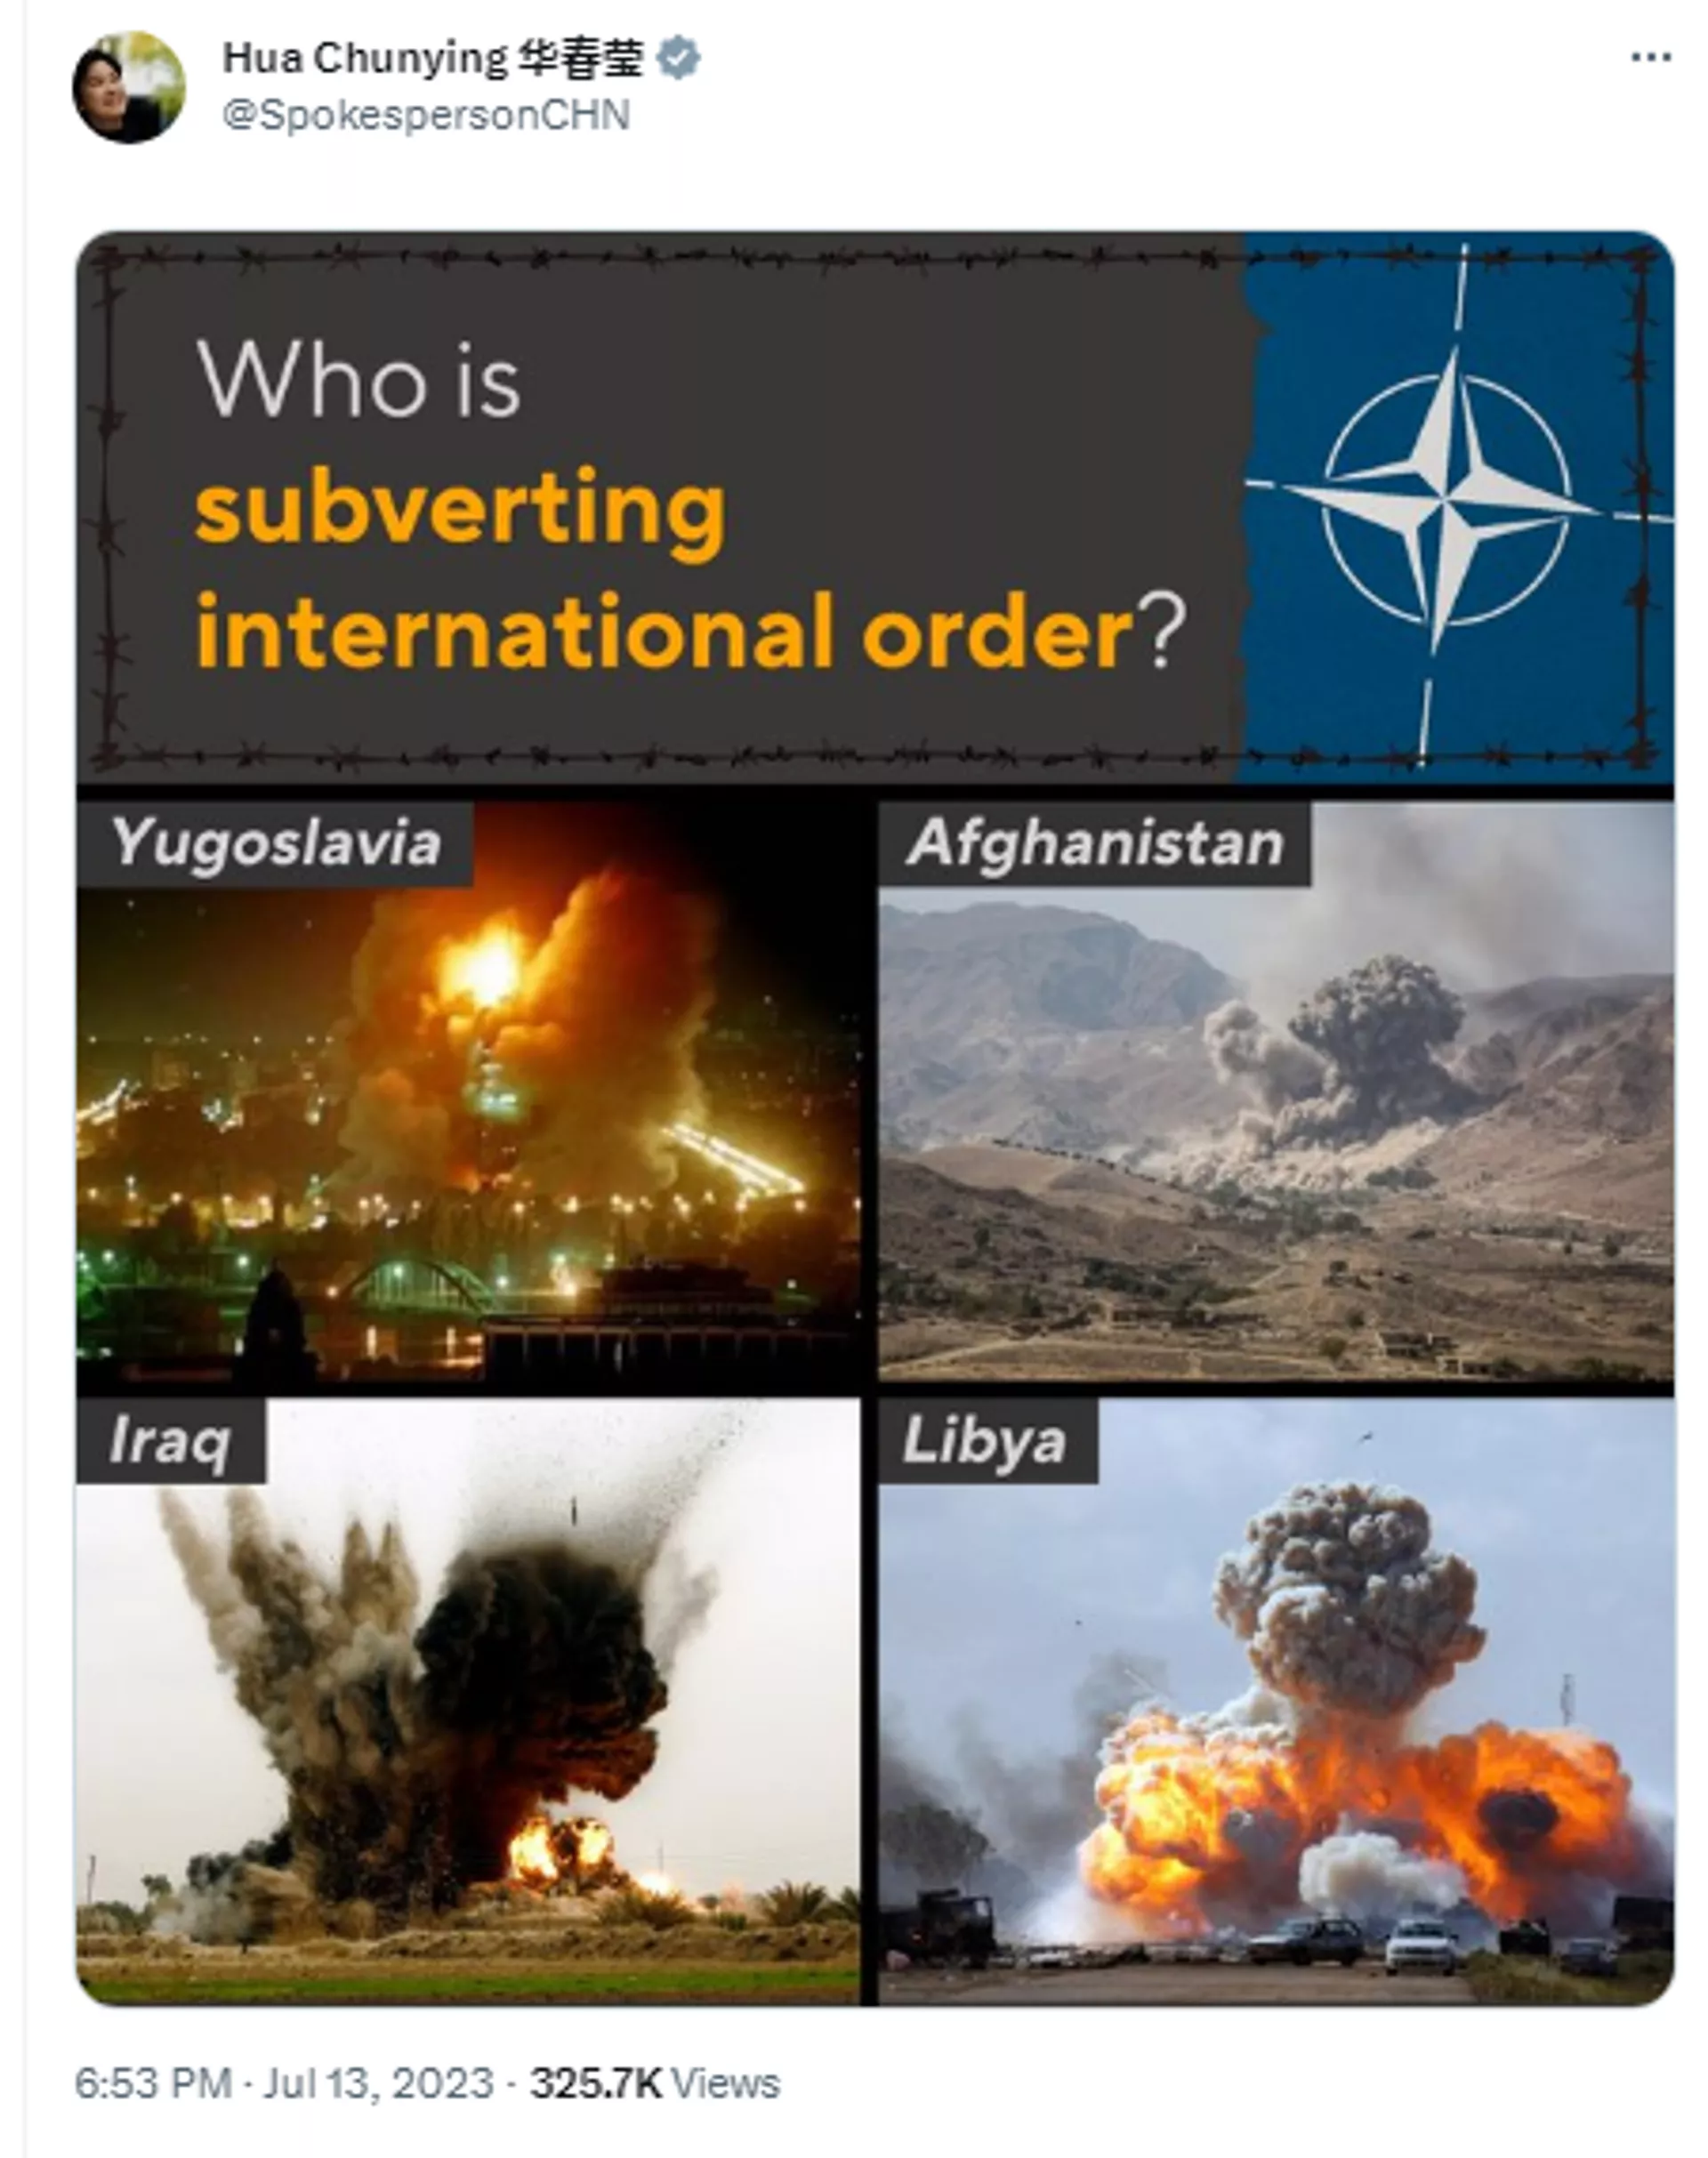 Screengrab of Twitter post by Chinese Foreign Ministry Spokesperson Hua Chunying featuring photographs of NATO bombings carried out in Afghanistan, Iraq, Libya and Yugoslavia.